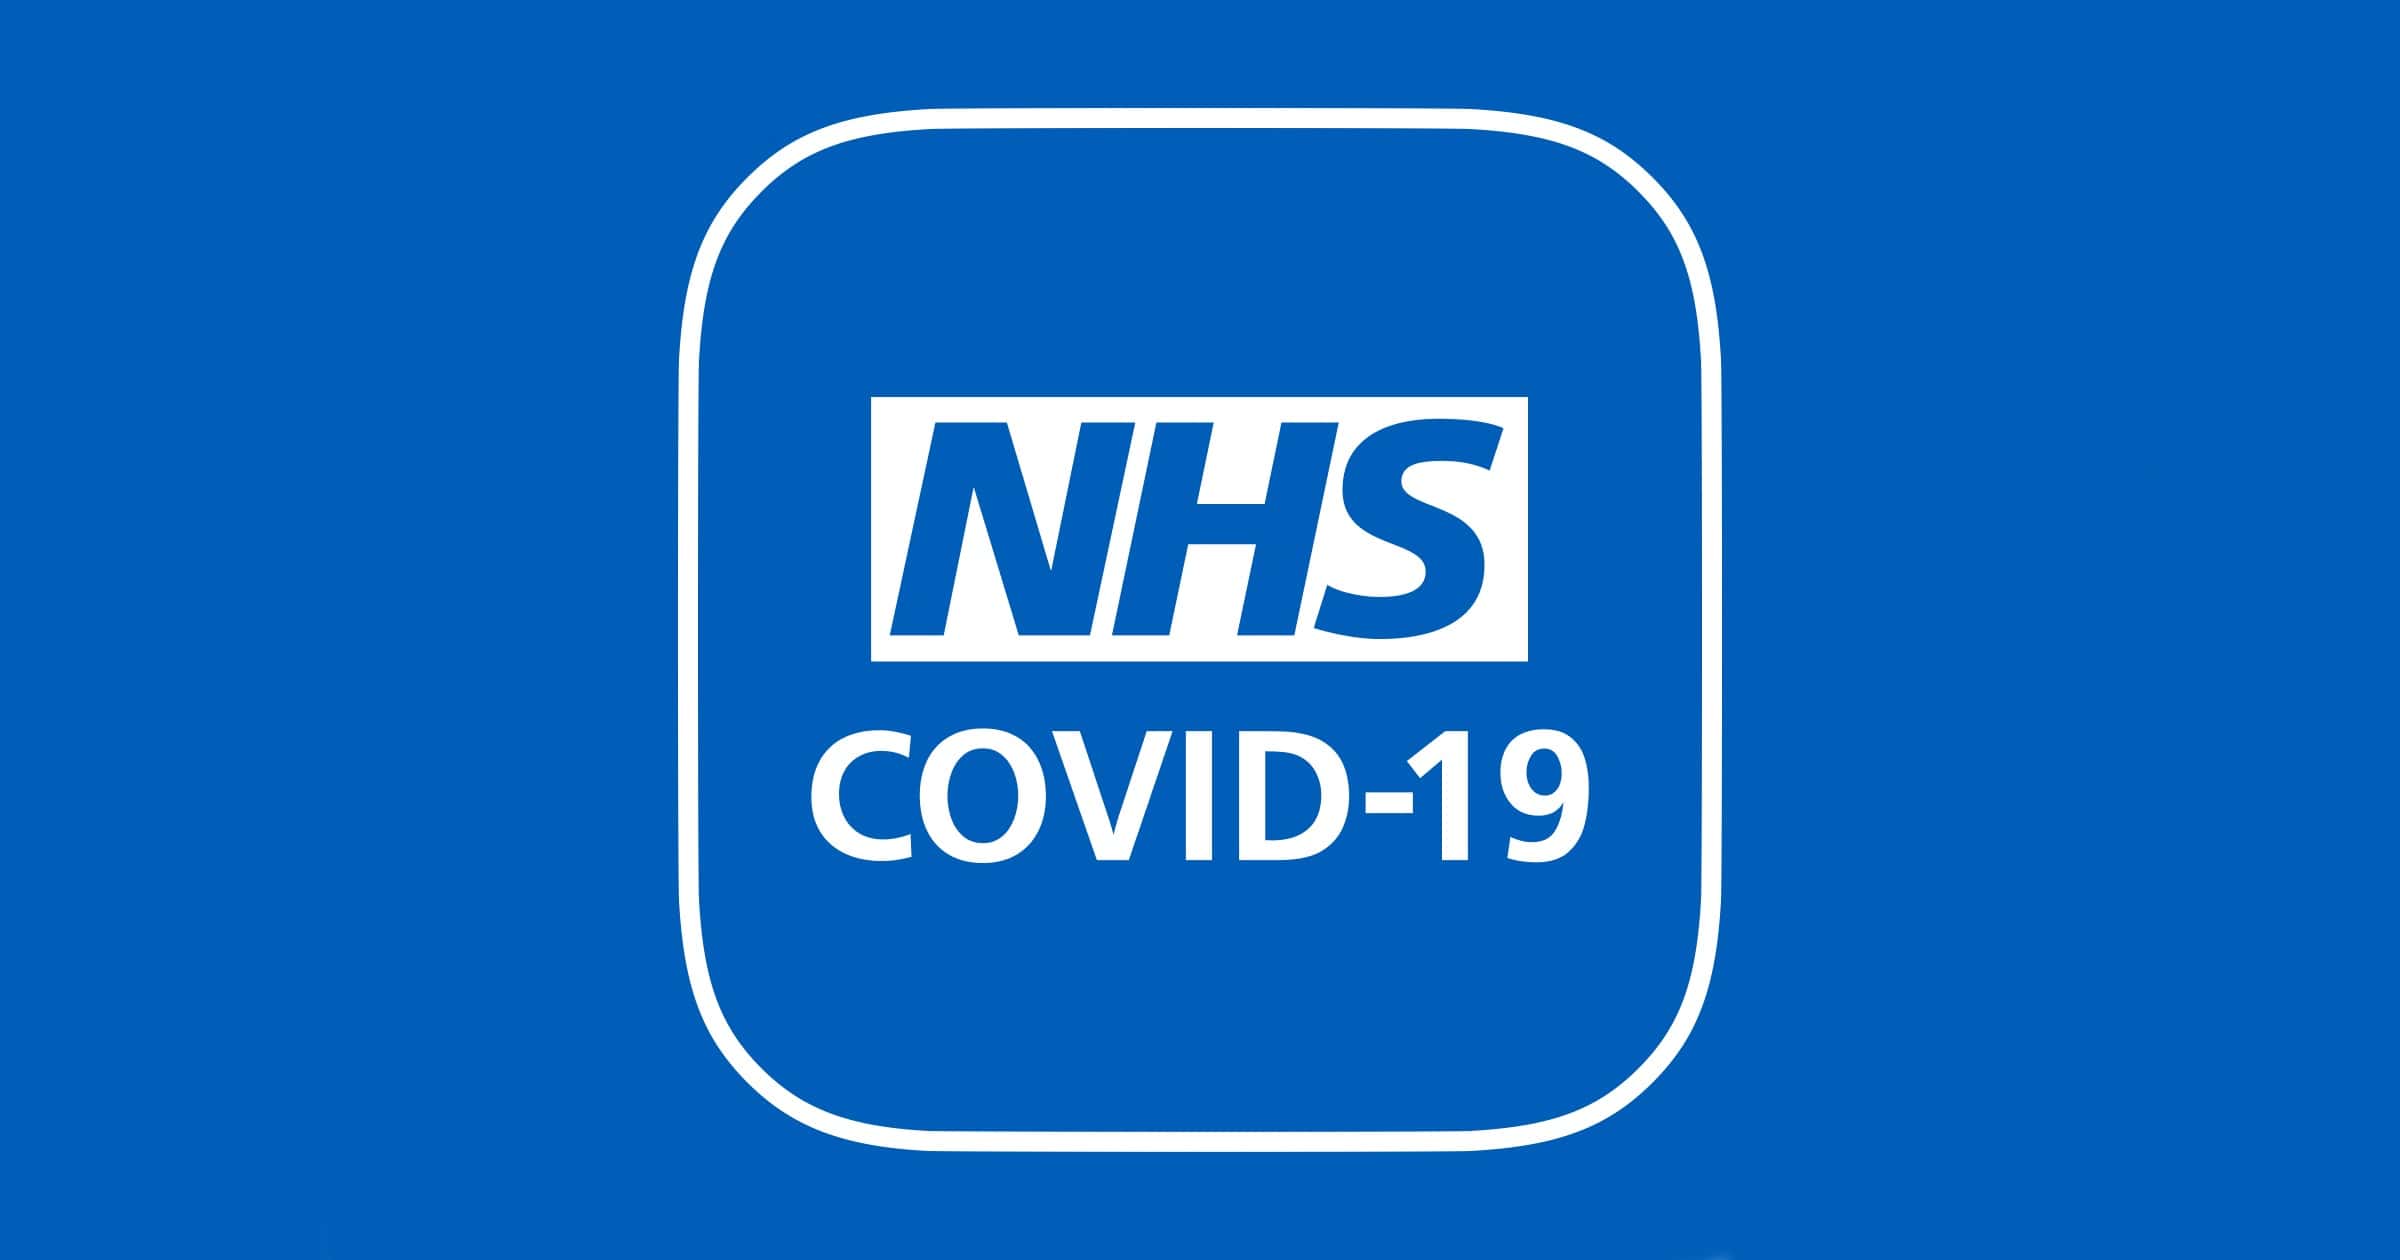 New Problem Appears for UK NHS COVID-19 App on iOS